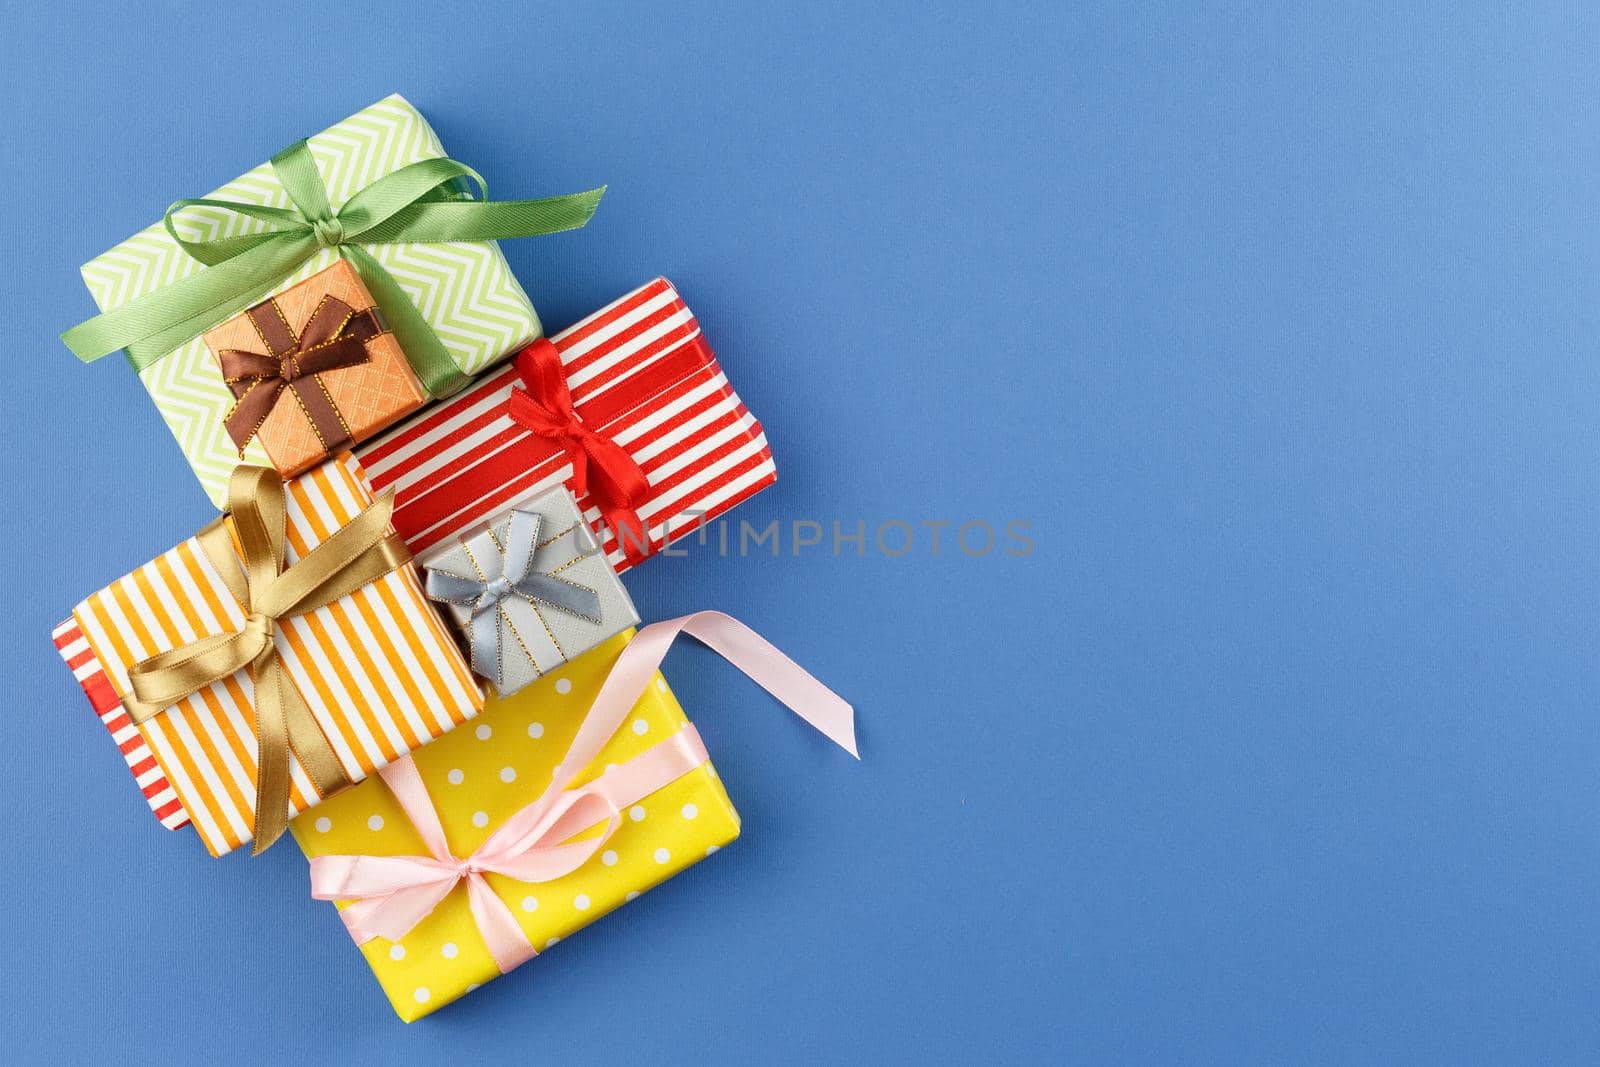 Paper wrapped gifts with satin ribbons. by alexxndr